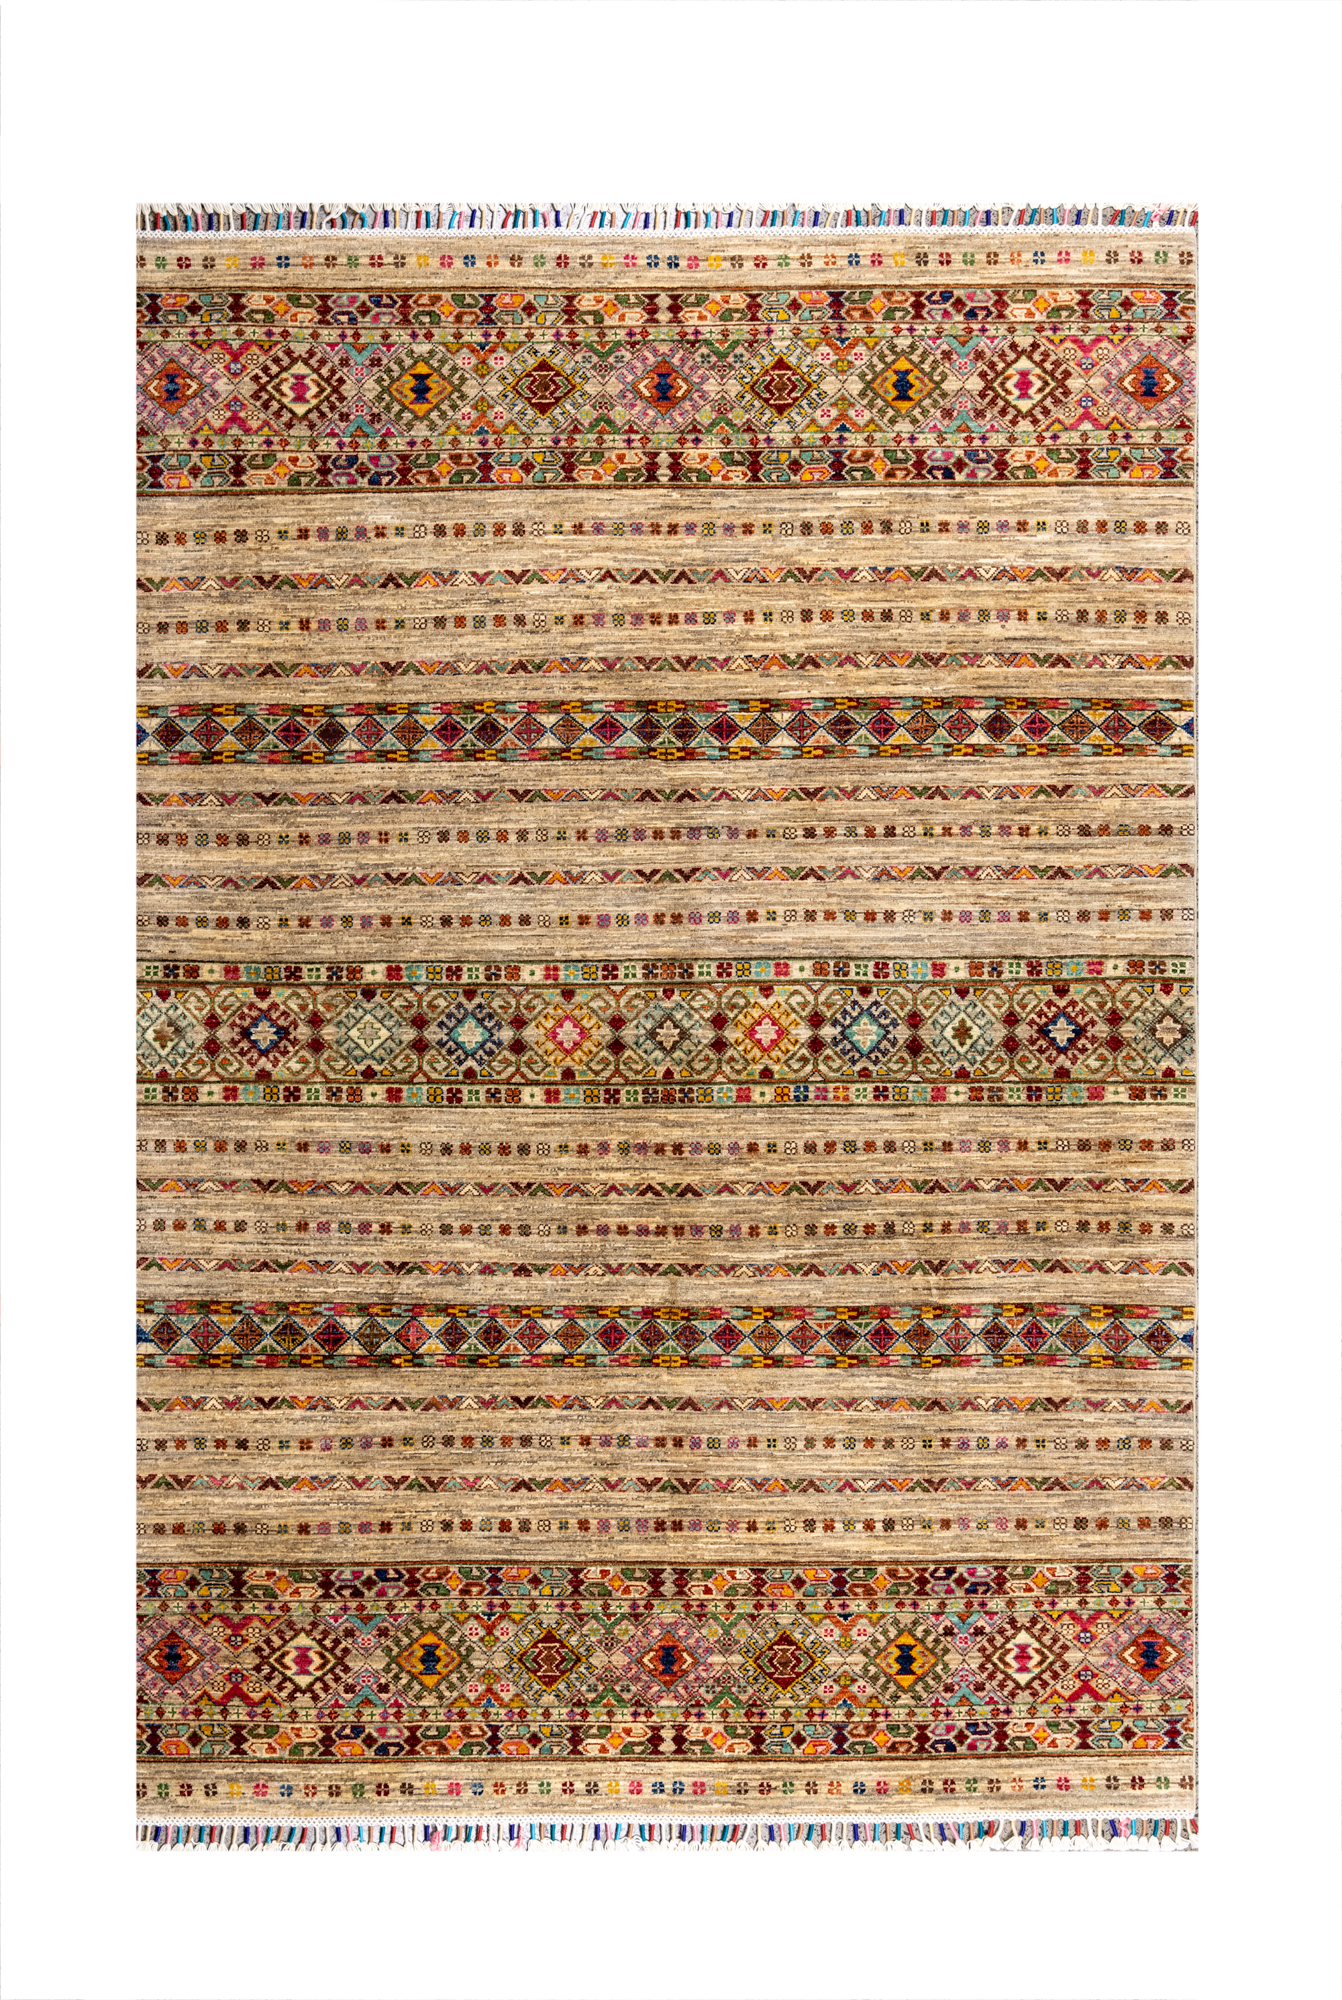 Size: 170x233cmFoundation: CottonPile: Handspun WoolShape: Rectangular Hand knotted and meticulously crafted by Afghan artisans in Afghanistan, this stunning Khorjin rug is made o